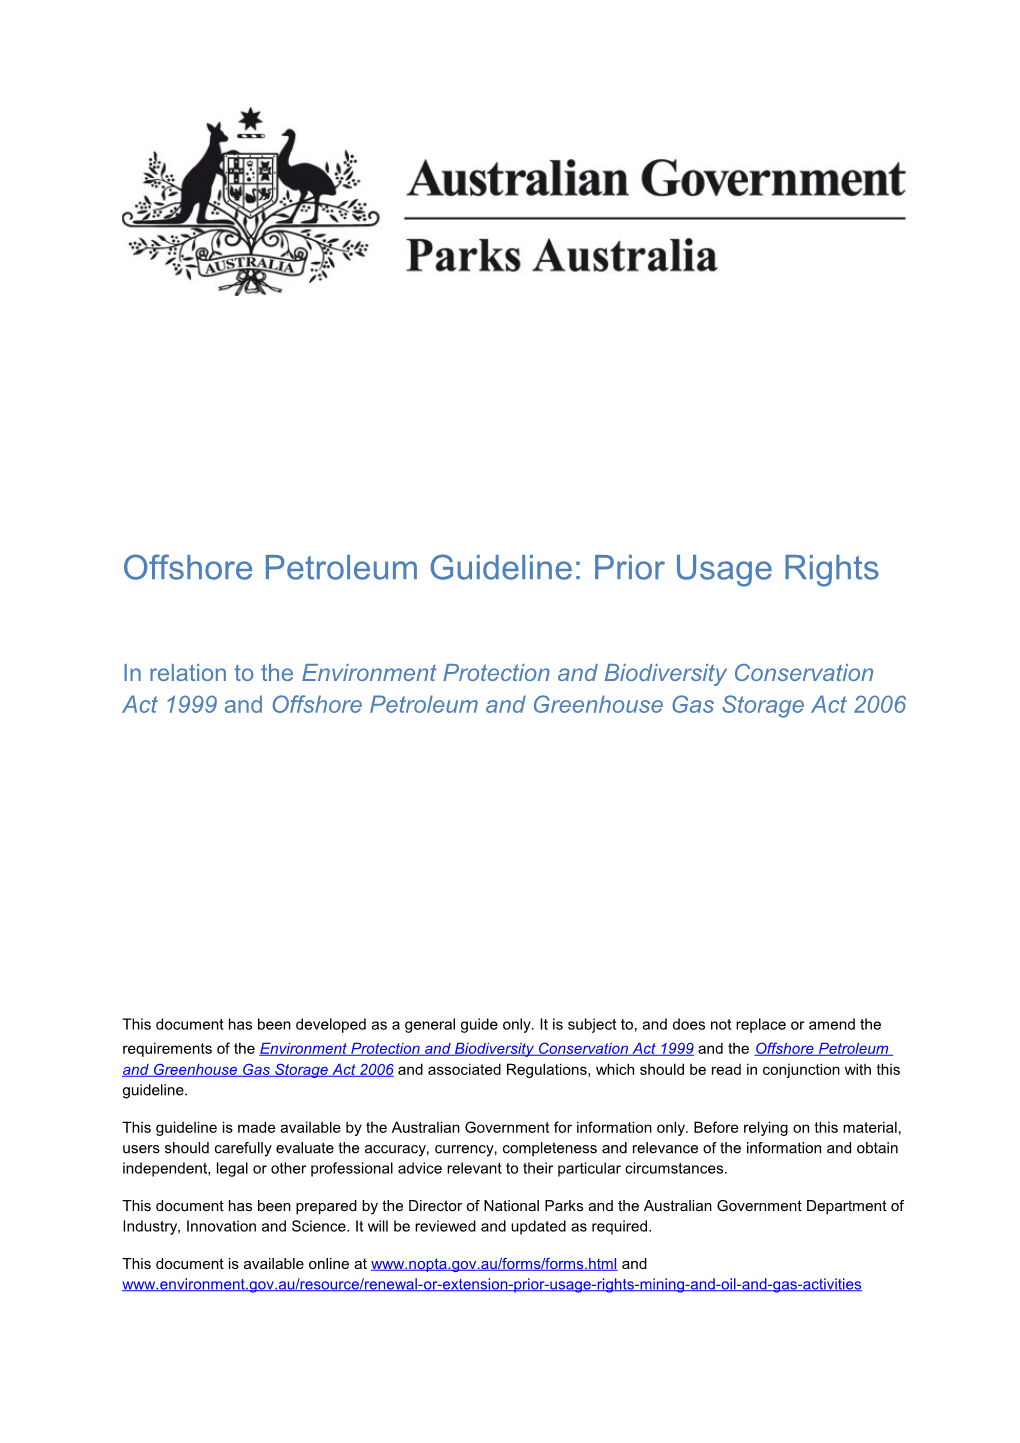 Prior Usage Rights Offshore Petrolum Guidline